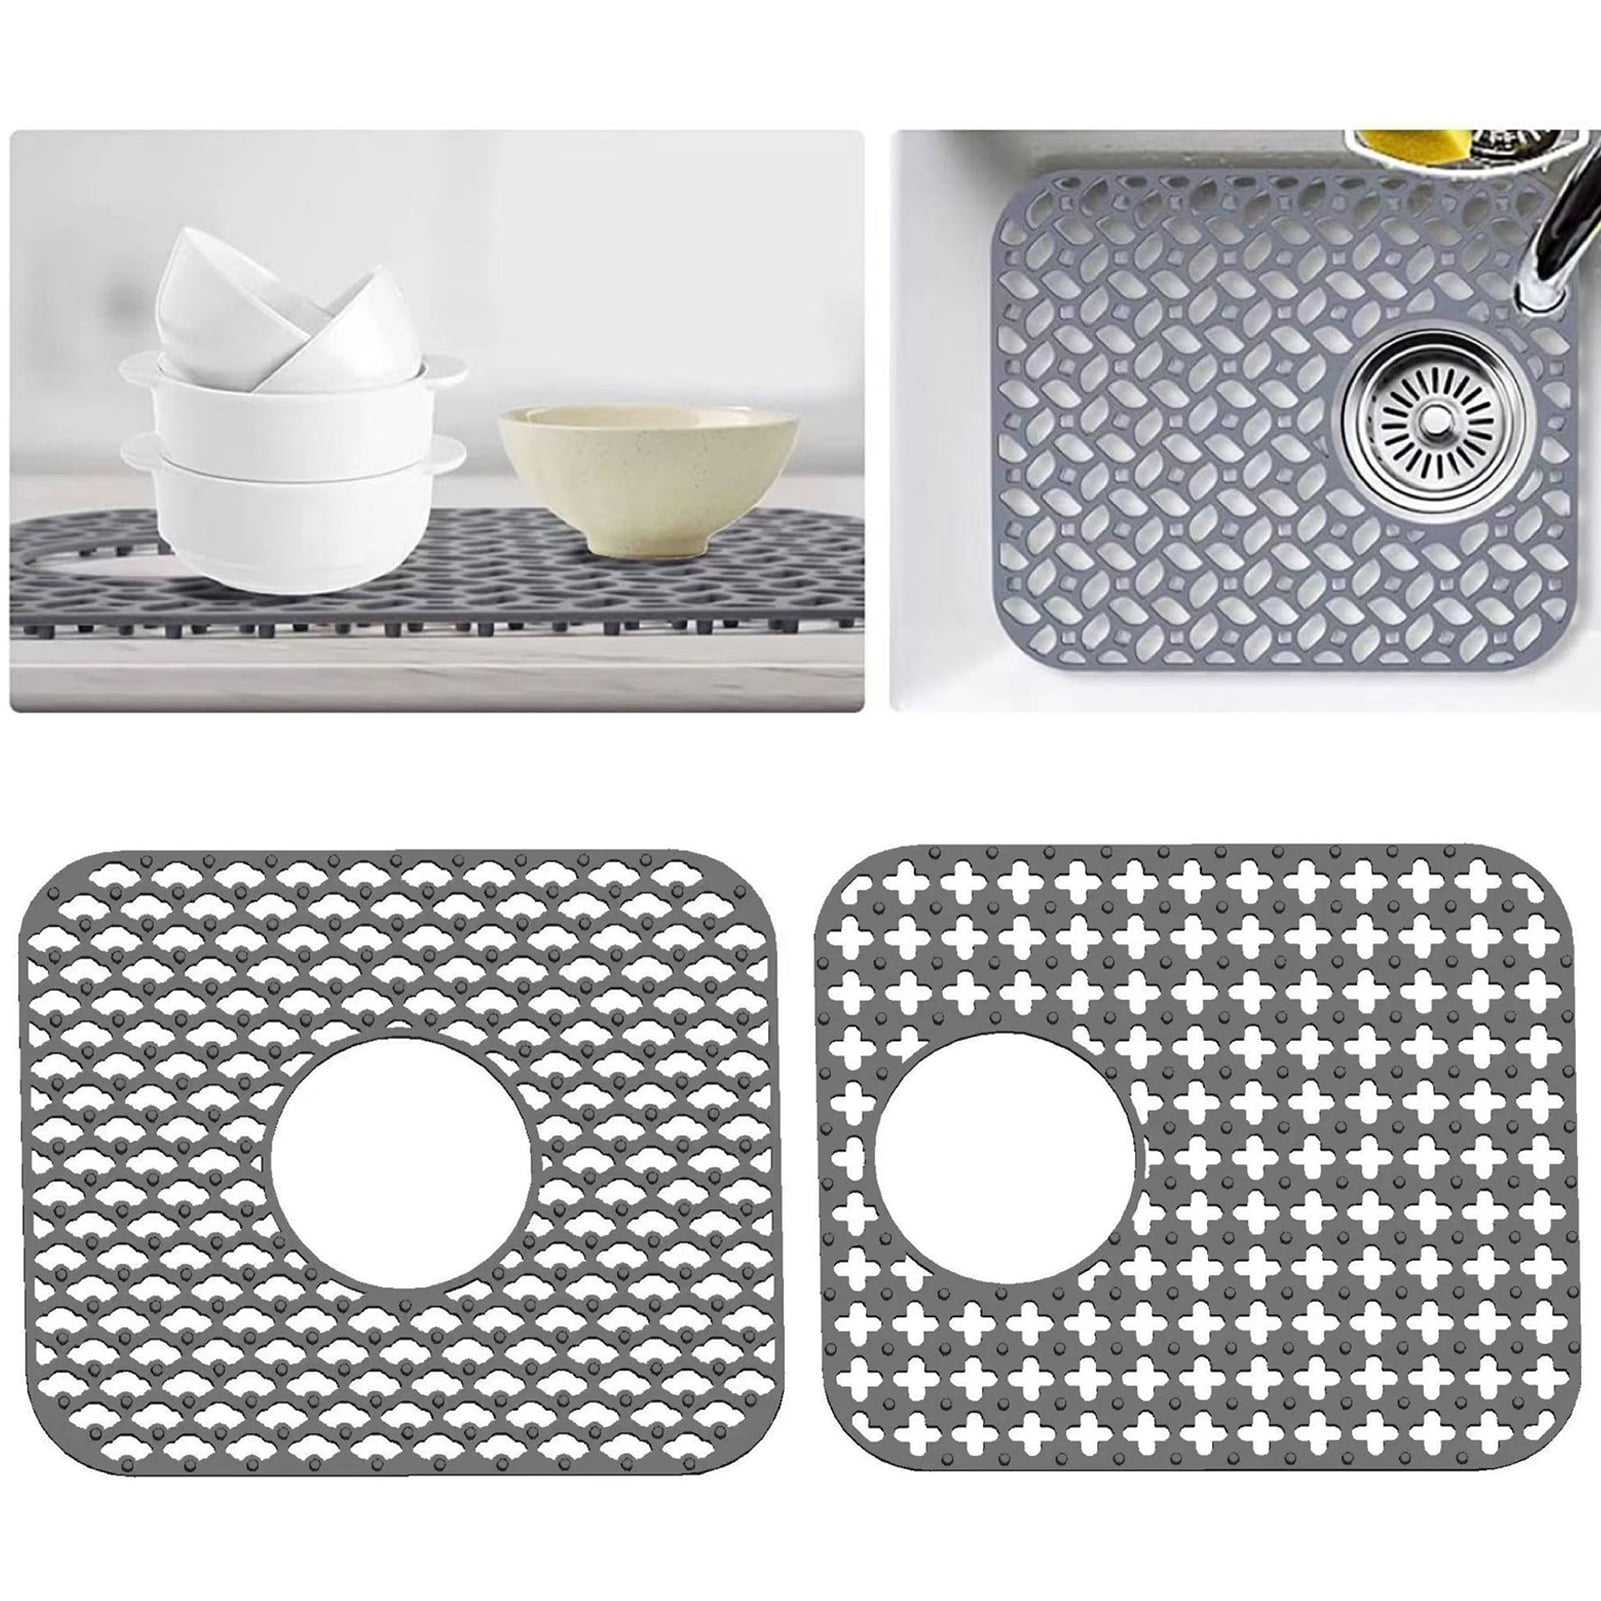 Tuelaly Anti-Scratch Food Grade Hollow Sink Mat with Drain Hole Practical Heat-Resistant Silicone Sink Dishwashing Pad Kitchen Tool, Size: 34.49